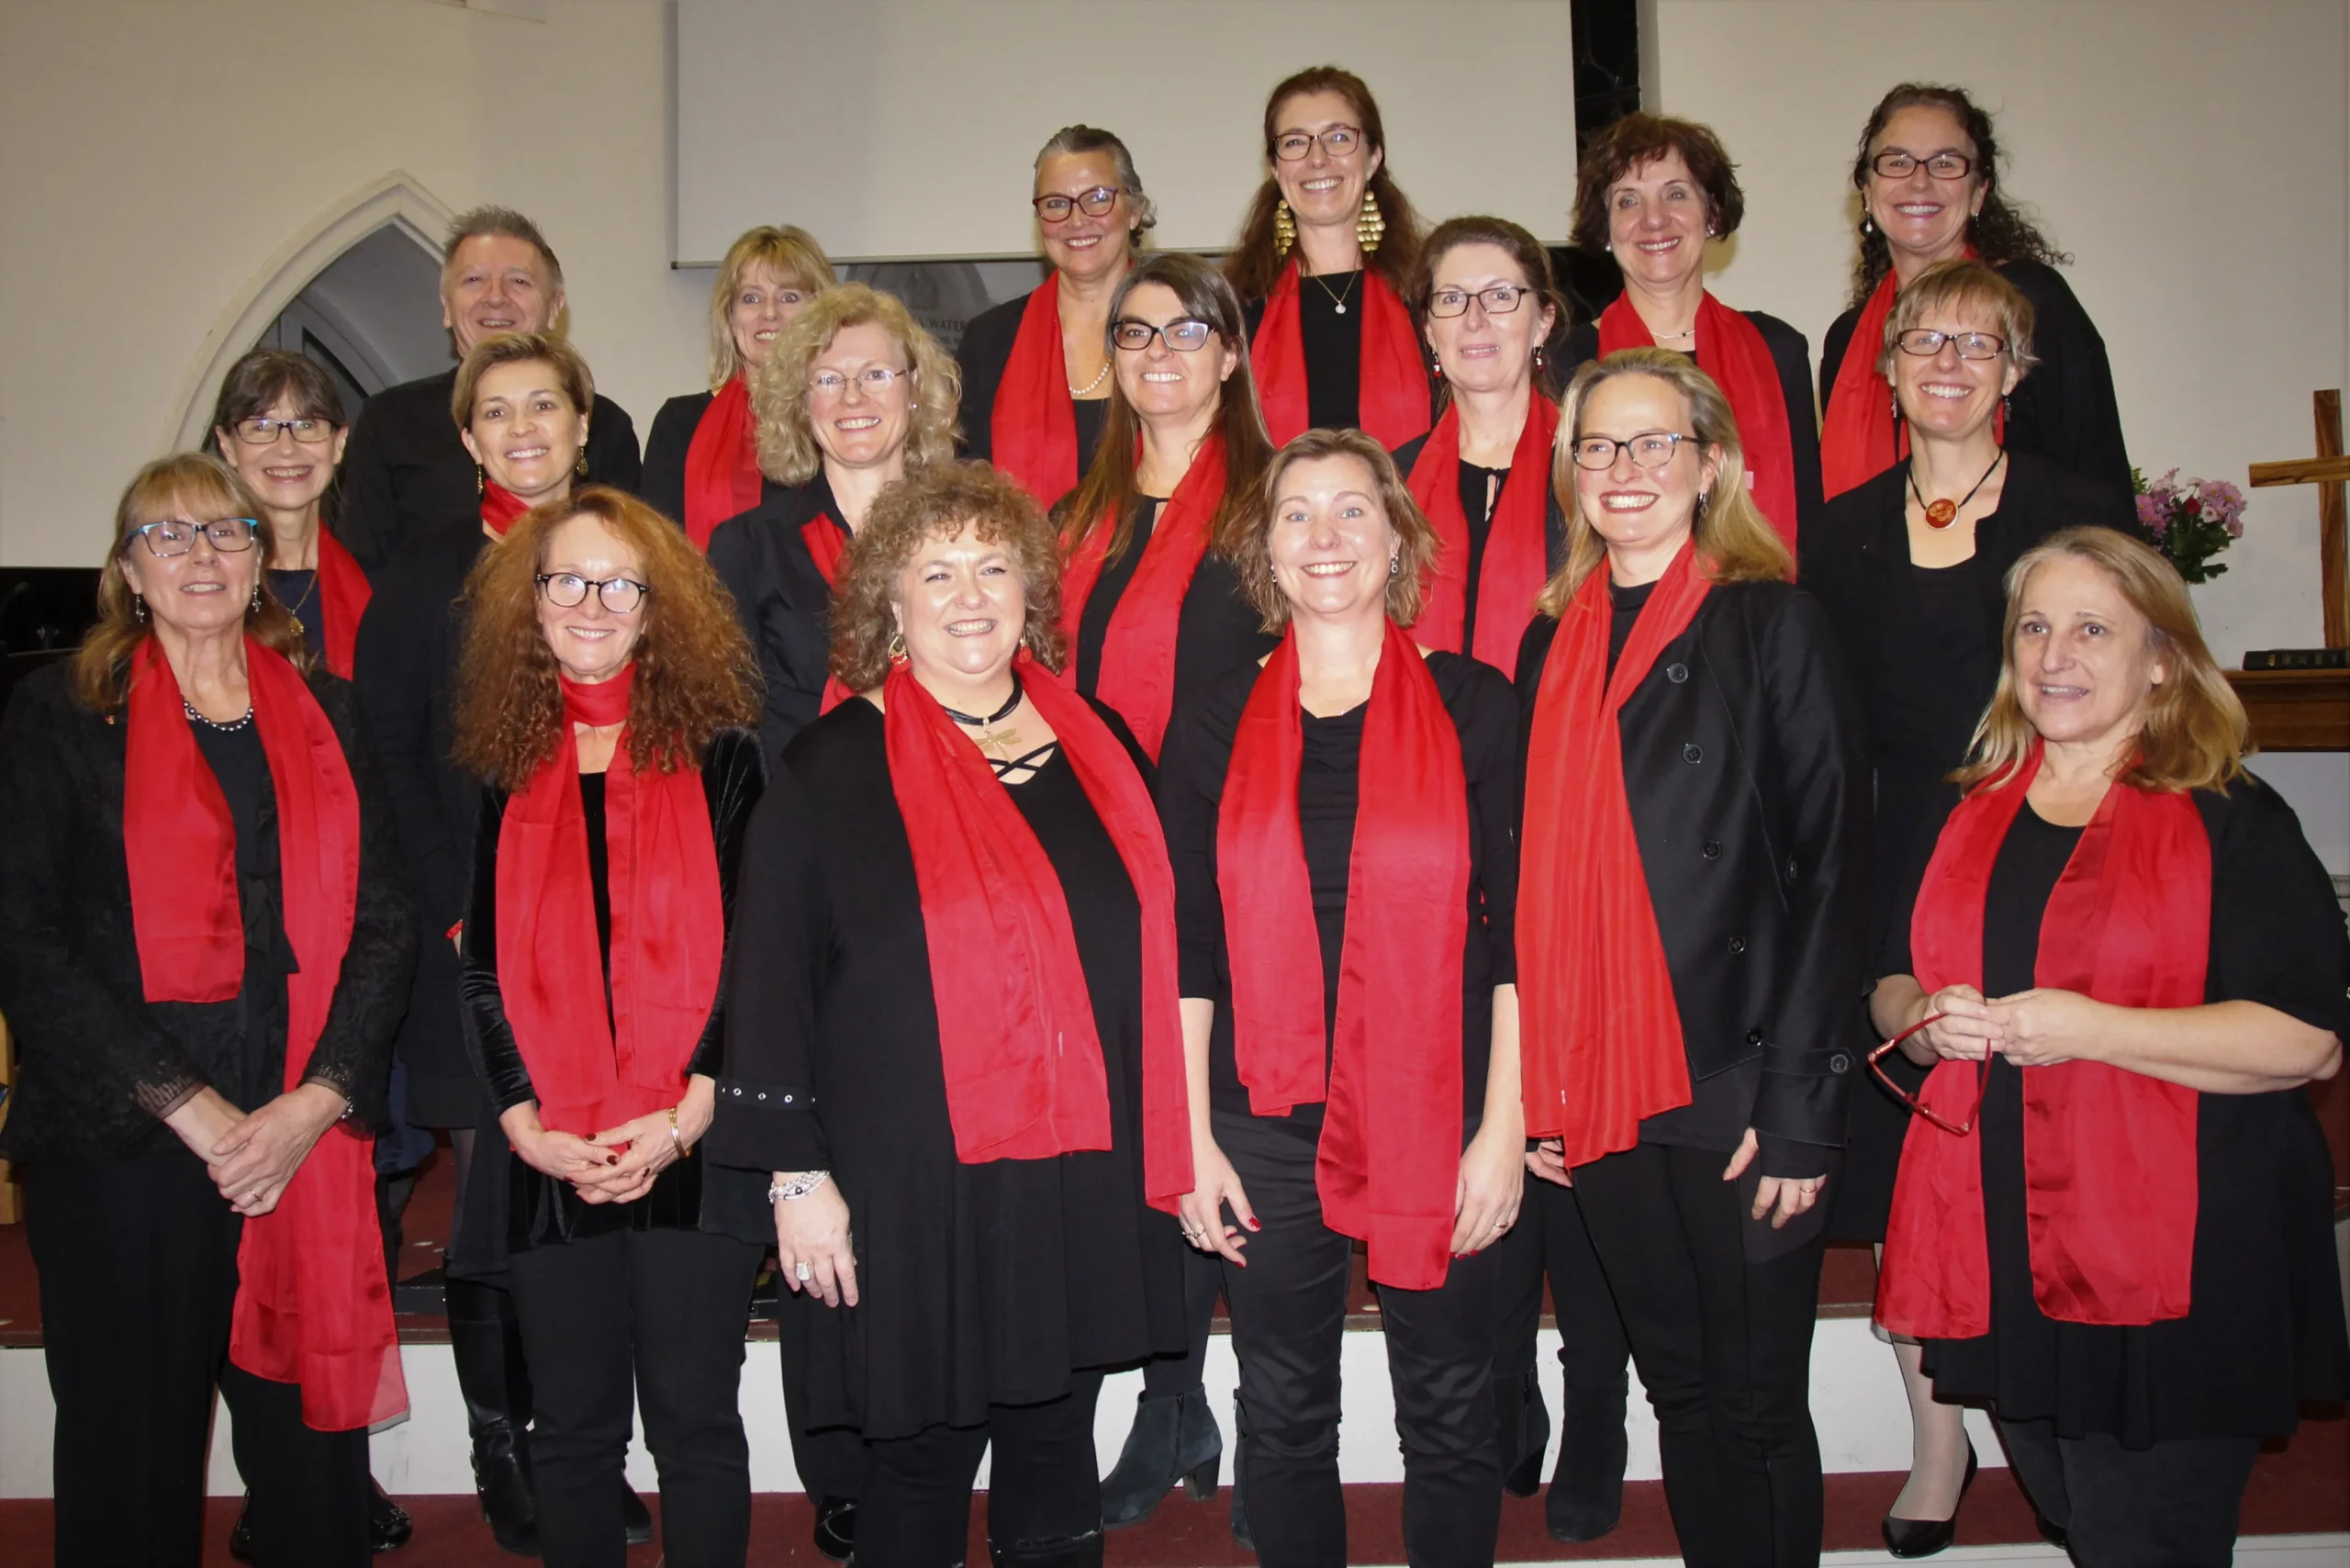 A choir of women wearing black and red scarves, harmoniously singing together in perfect unison.